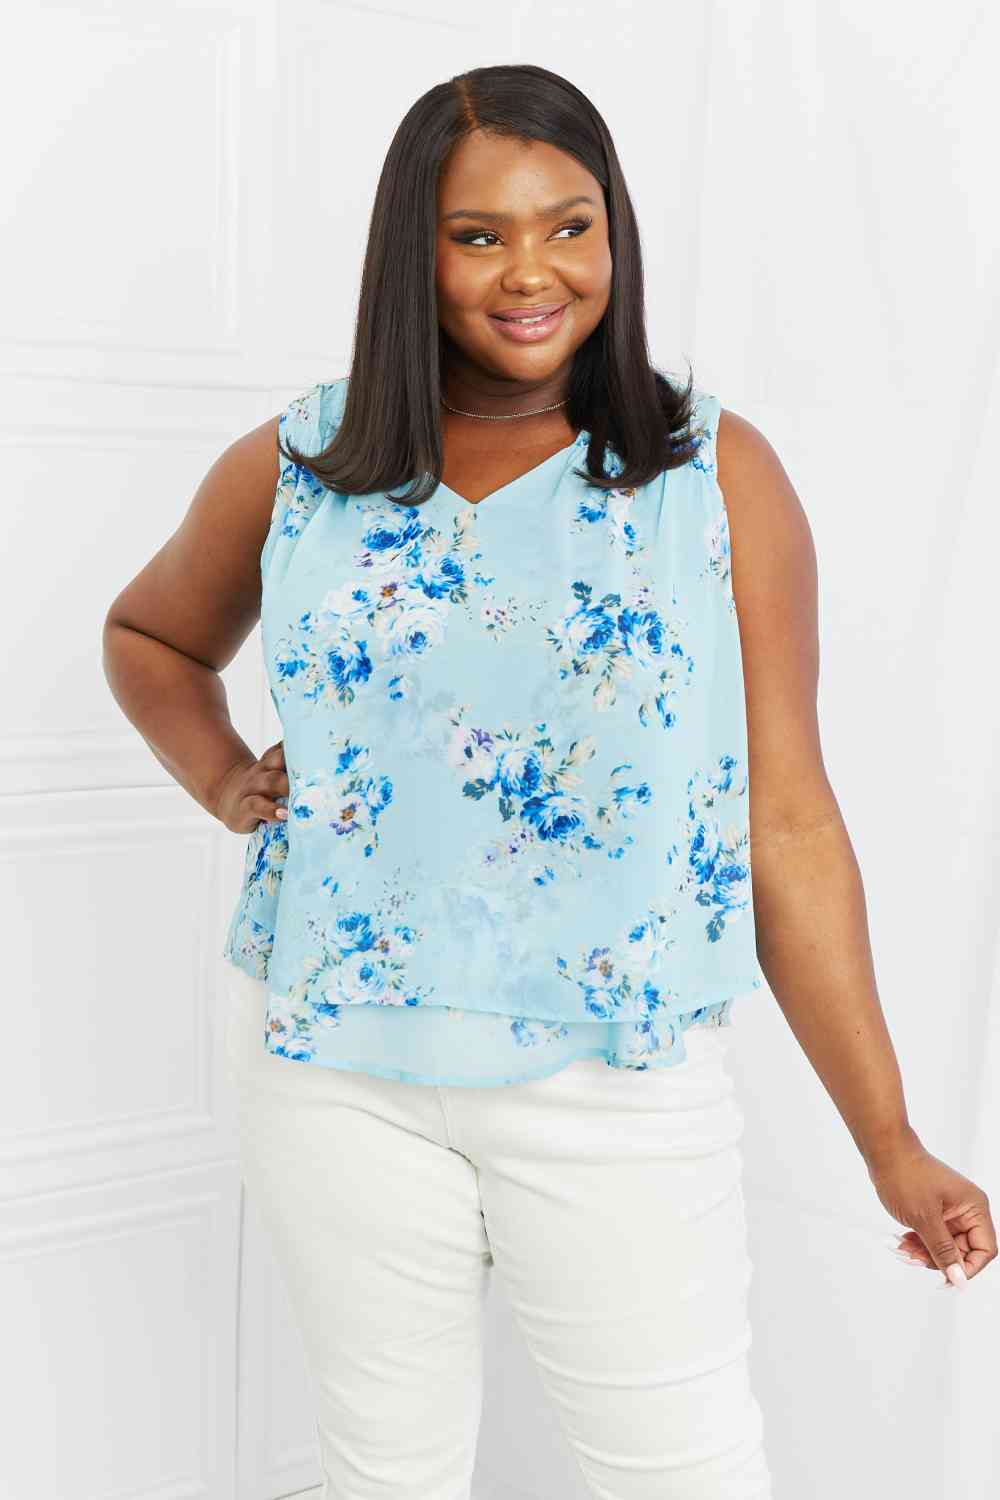 Off To Brunch Full Size Floral Tank Top - Pastel Blue / S - Camis & Tops - Shirts & Tops - 1 - 2024